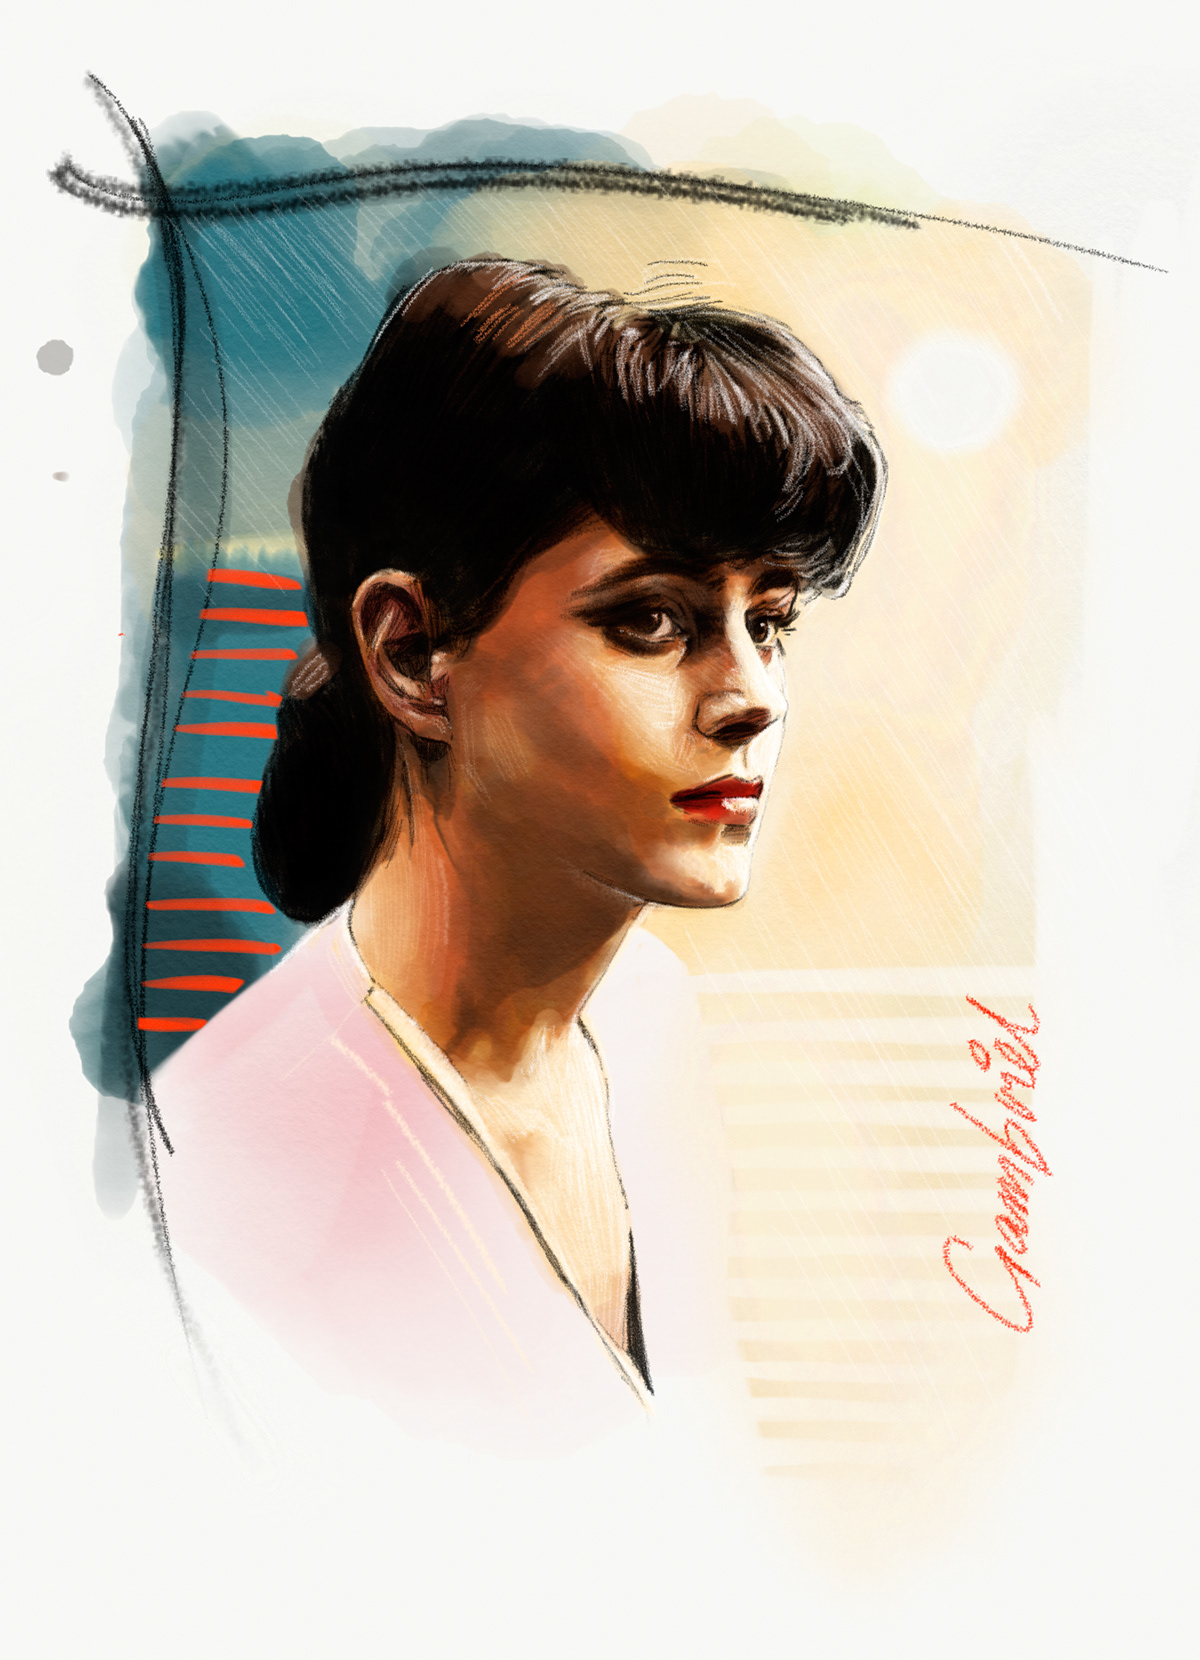 Portrait of Sean Young, Blade Runner, Personal work.